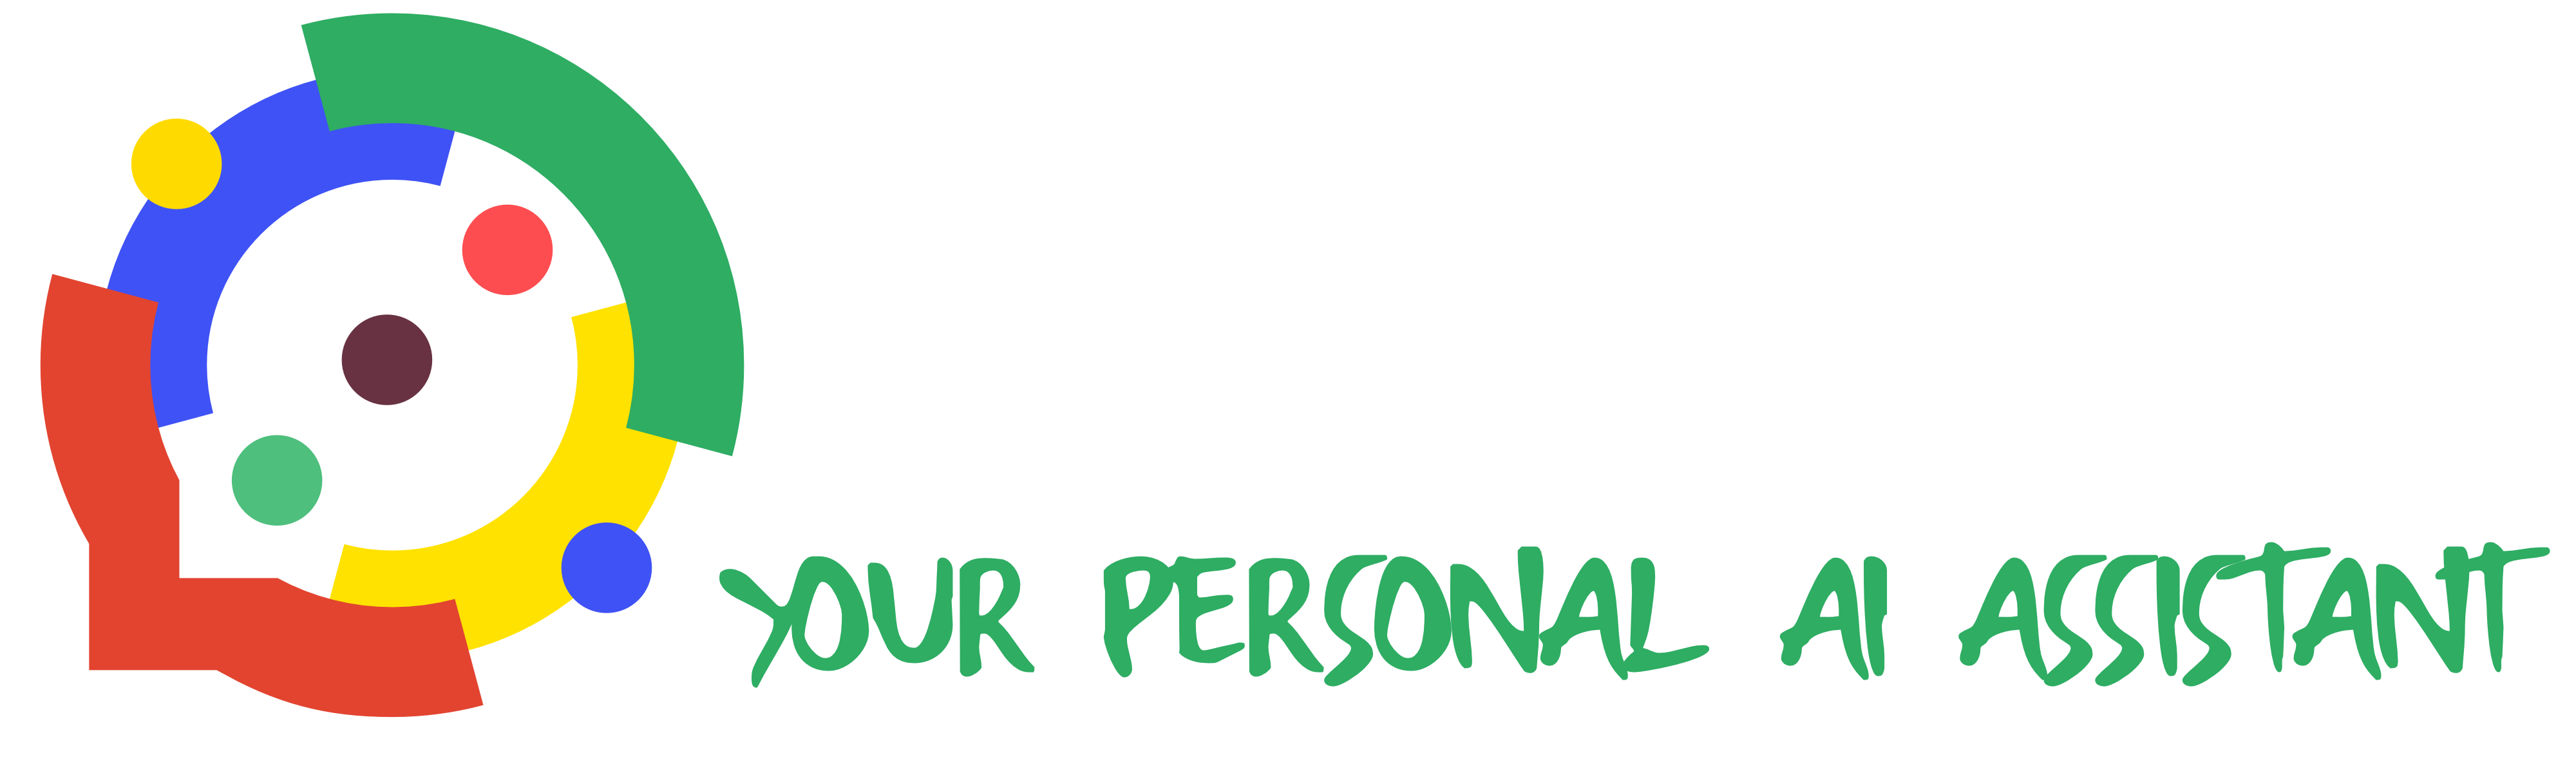 Mobile GPT - Your personal AI assistant